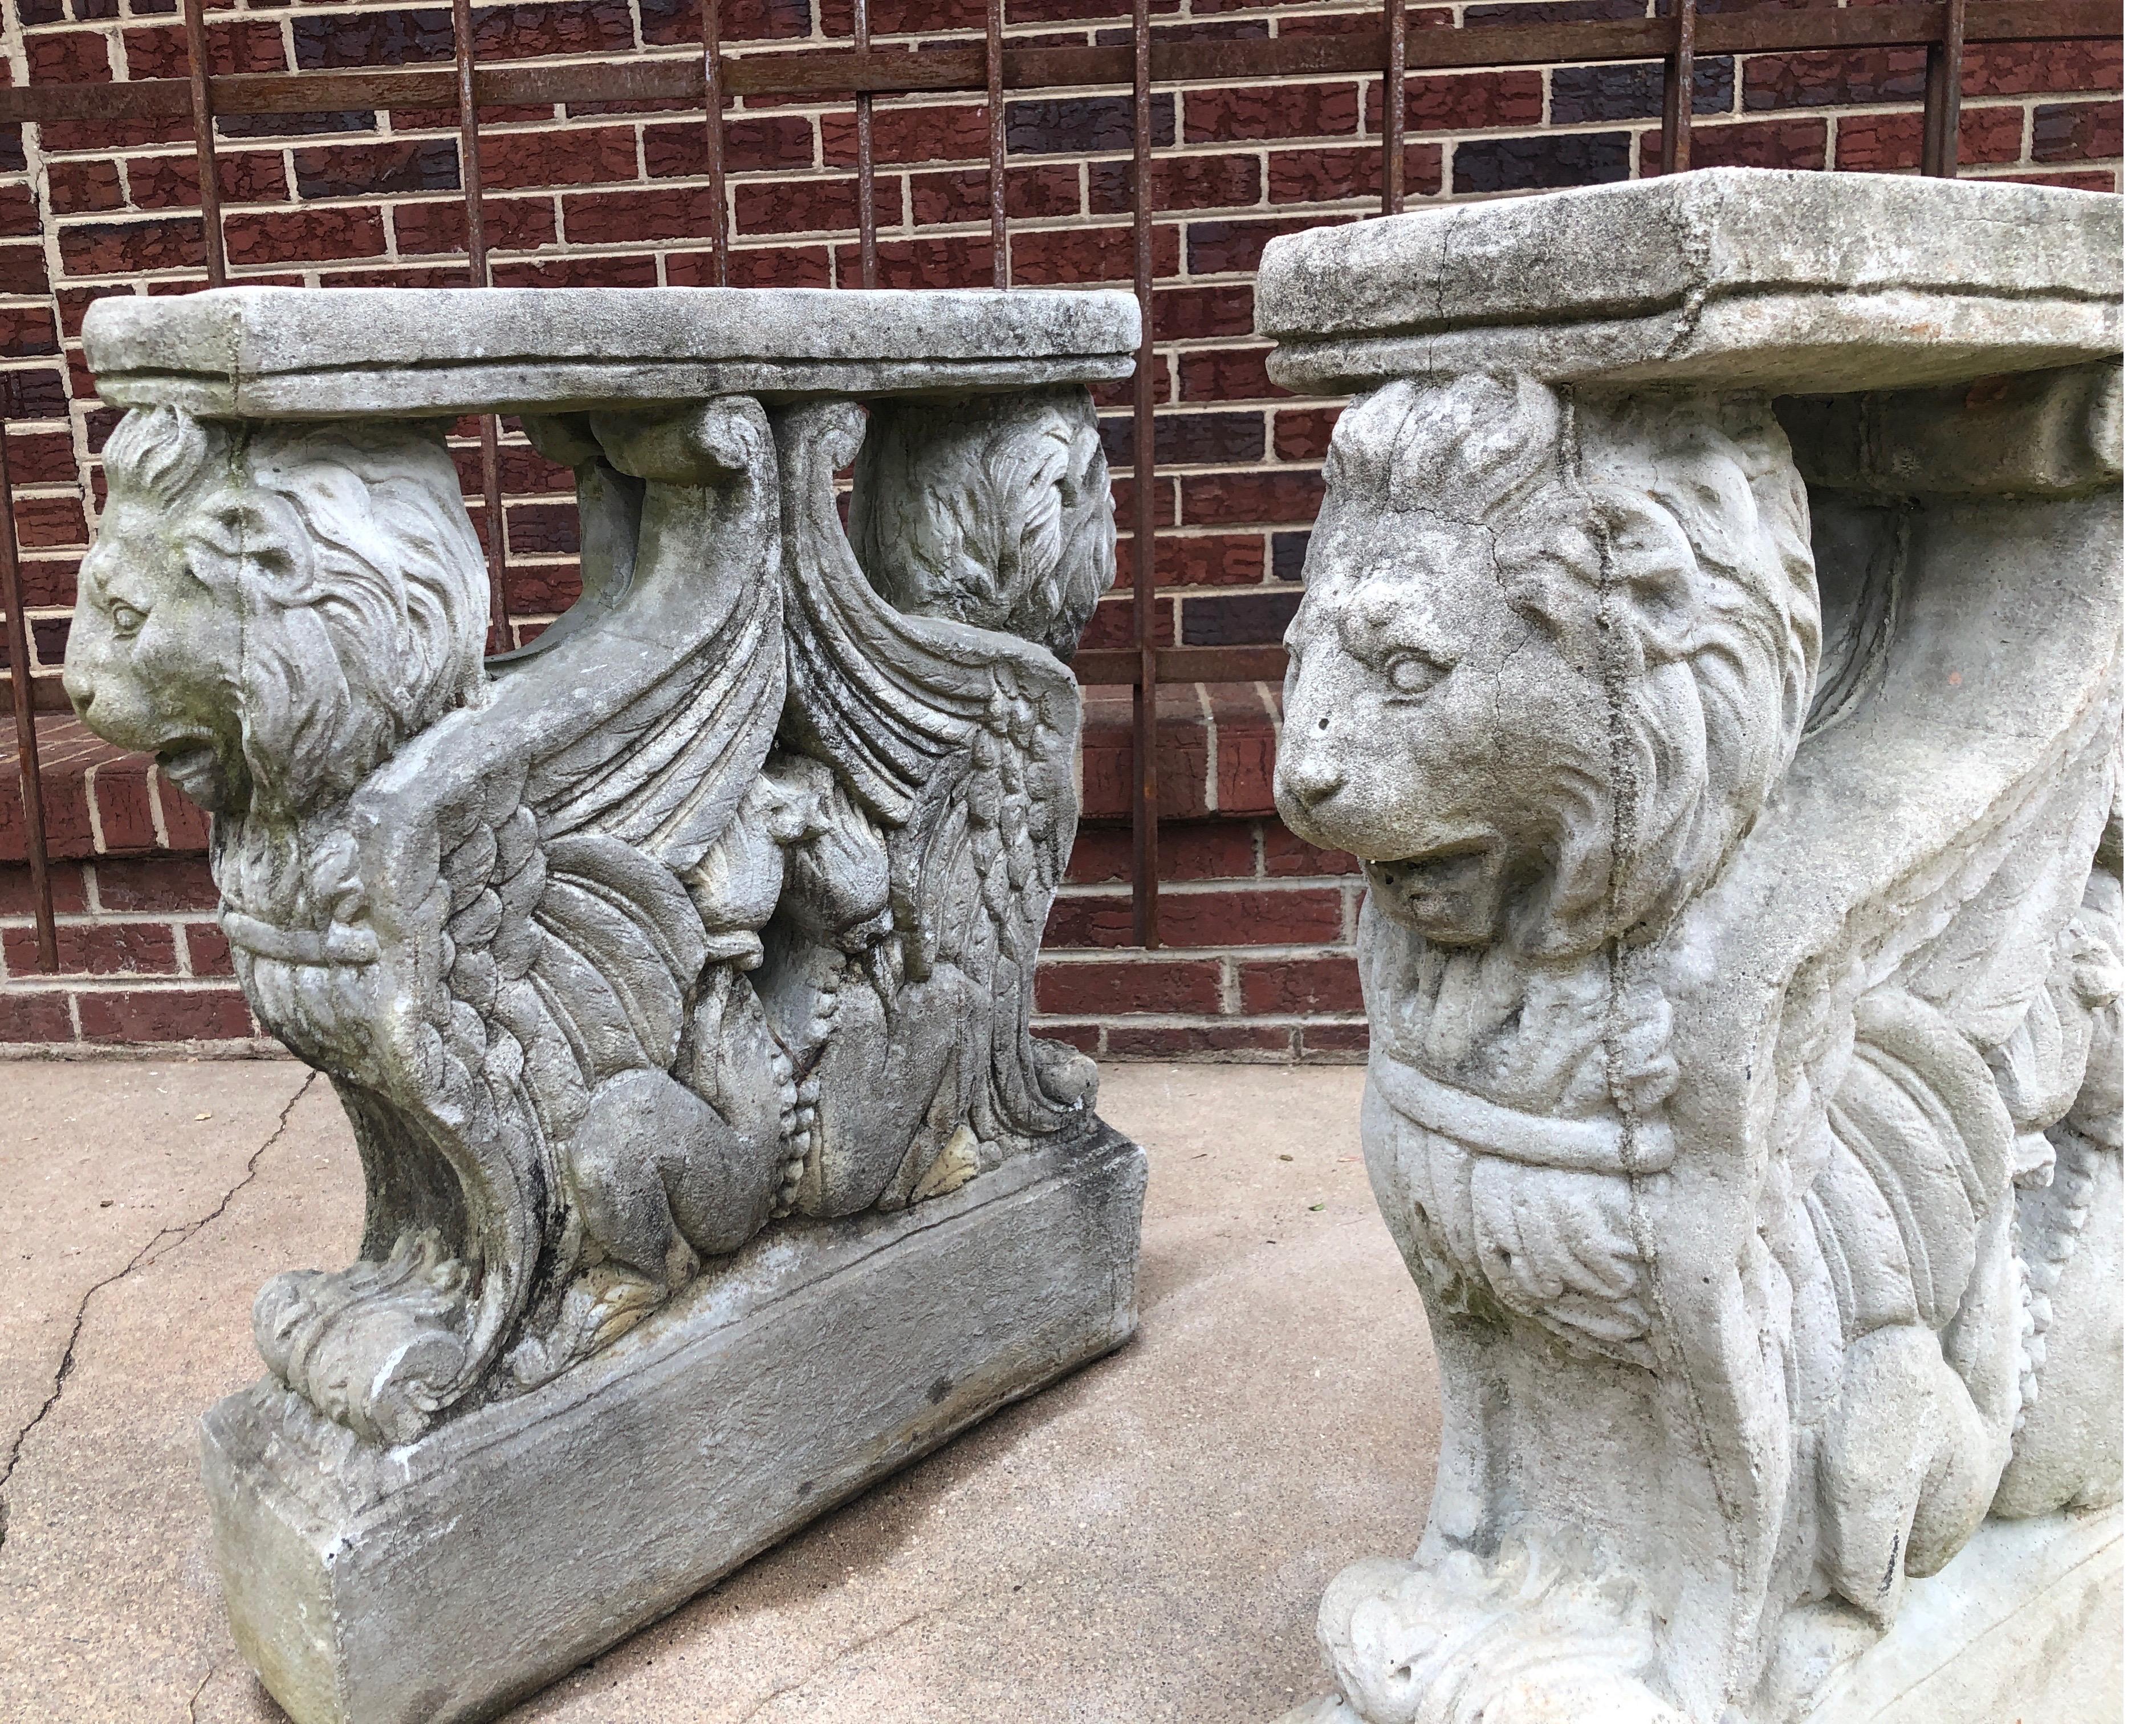 Vintage cast stone/concrete pedestal table bases. Would work indoor/outdoor as dining table, library table or console base. 

Pair of classical winged griffins. 

Stone does show signs of age and wear with minor cracks, etc. See images.